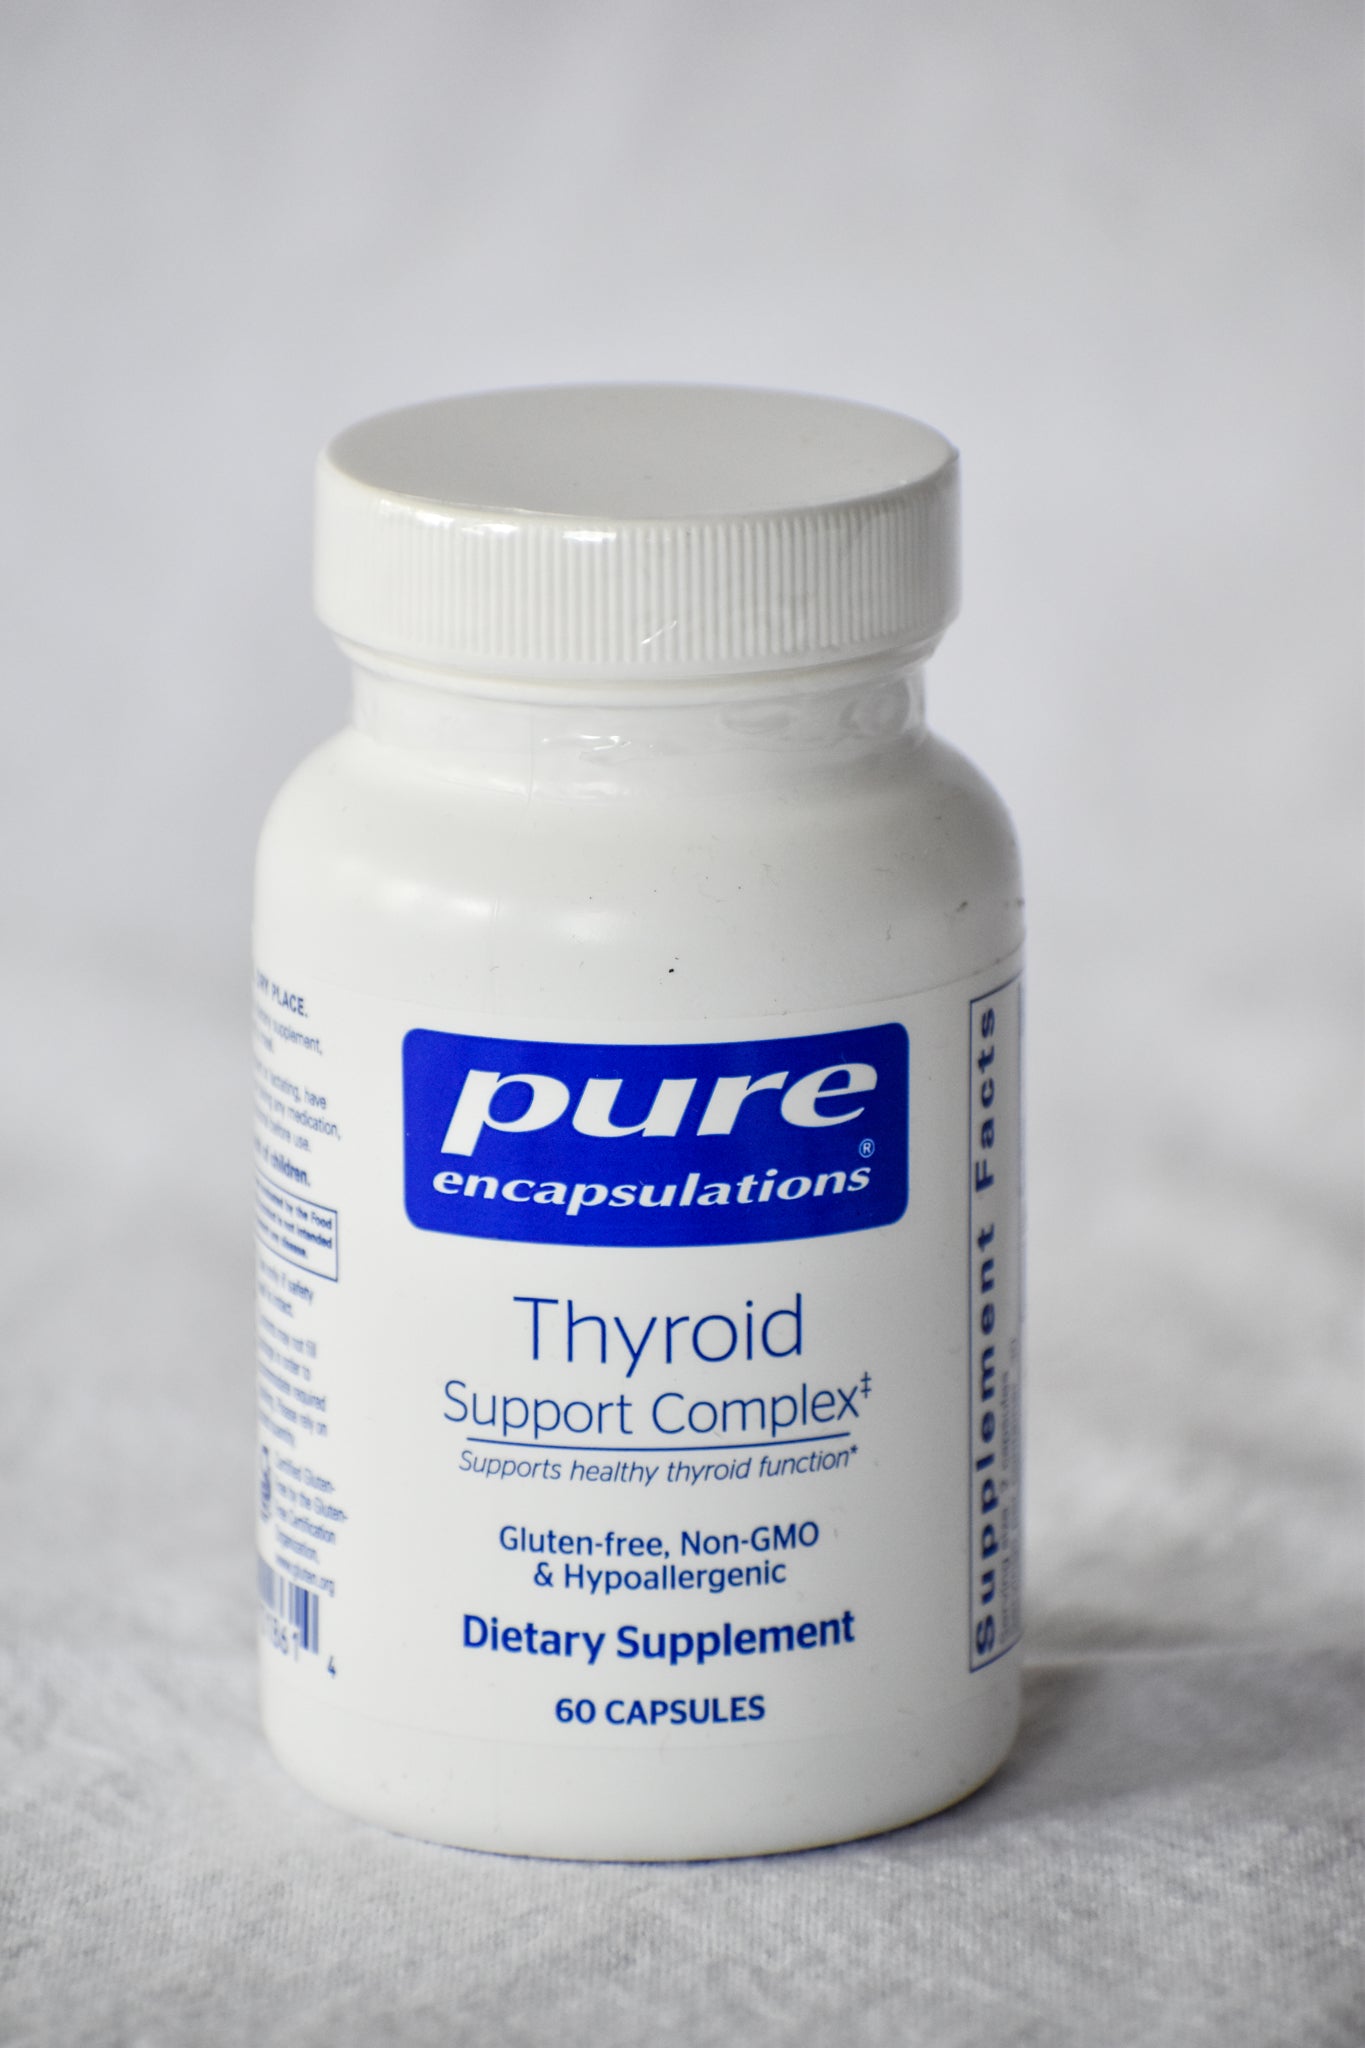 Thyroid Support Complex